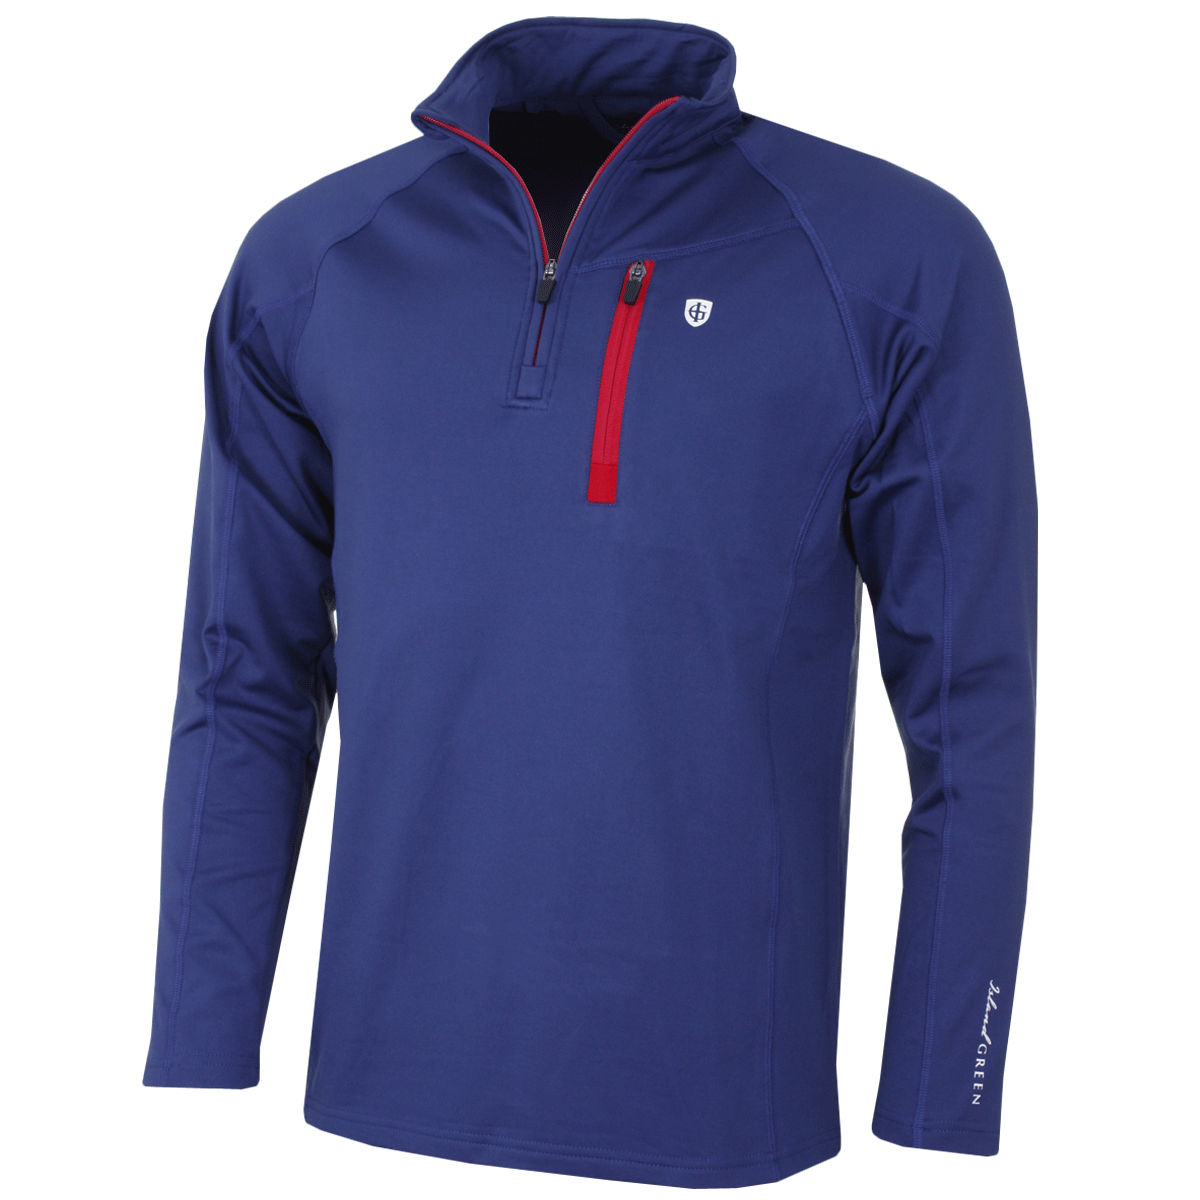 Blue and Red Golf Logo - ISLAND GREEN TOUR LOGO THERMAL 1 4 ZIP GOLF JUMPER RED